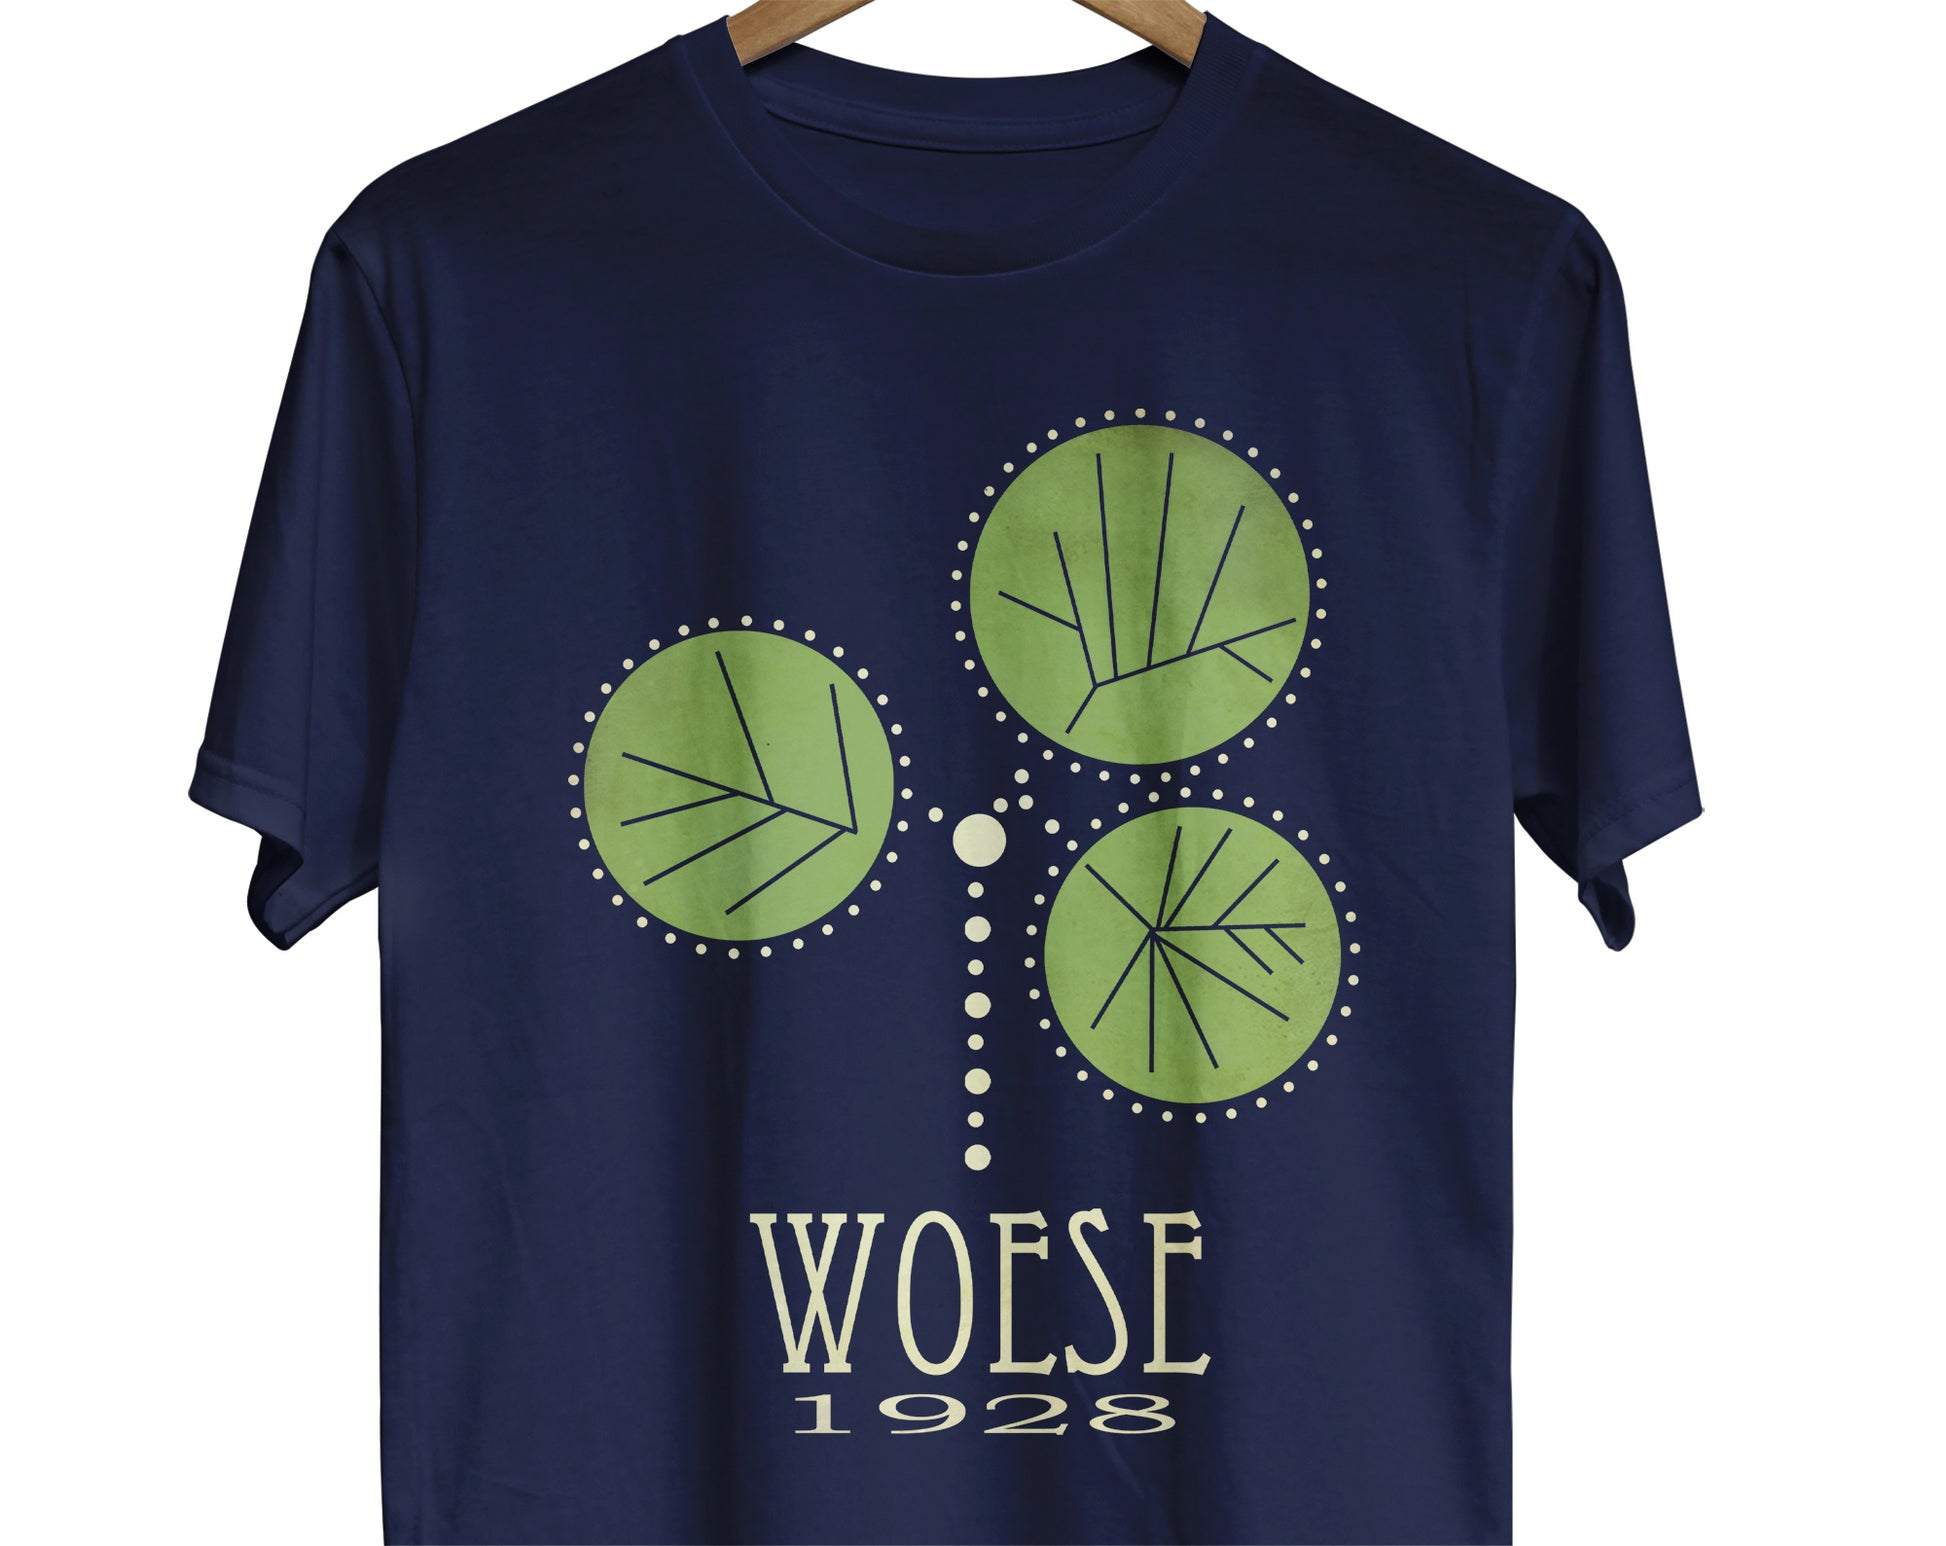 Carl Woese taxonomy tree t-shirt for microbiologist or microbiology teacher